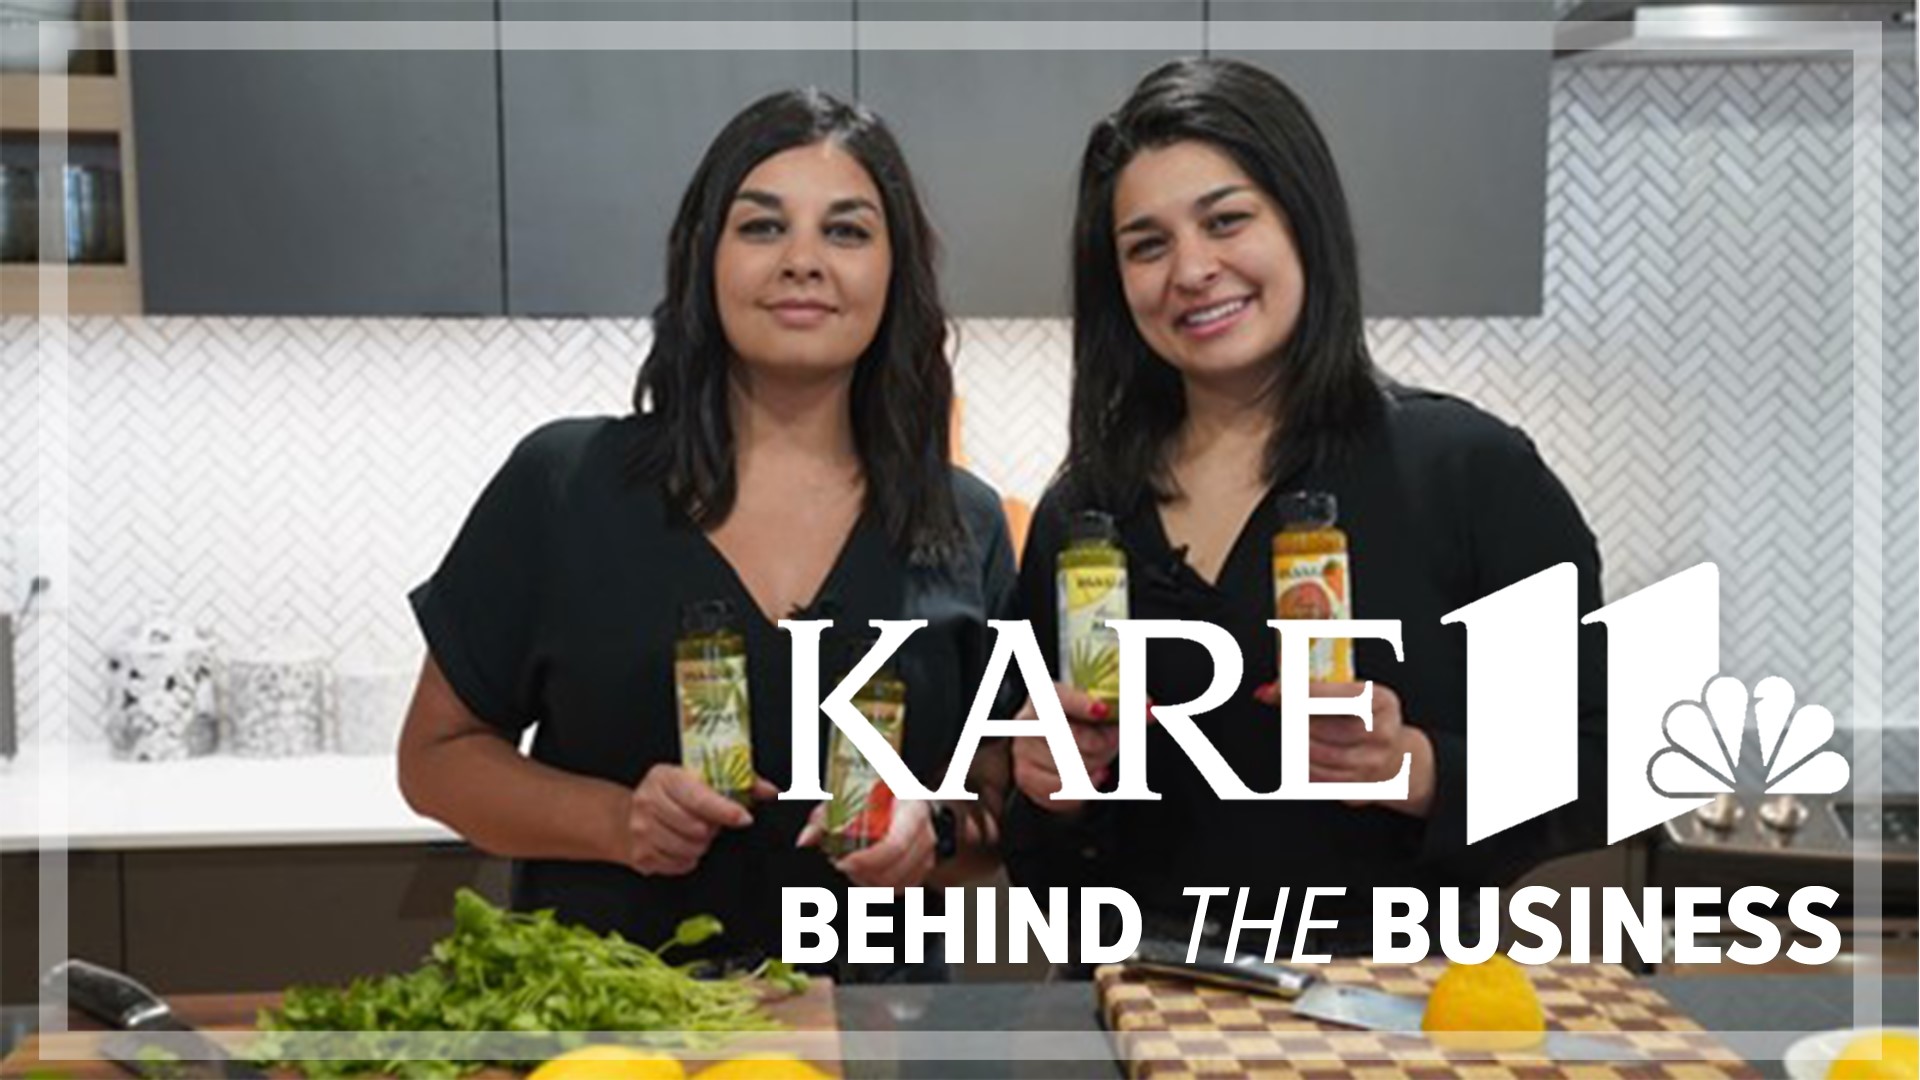 Sheilla and Yasameen Sajady took their mother's recipes and made a sauce line that honors their Afghan roots.